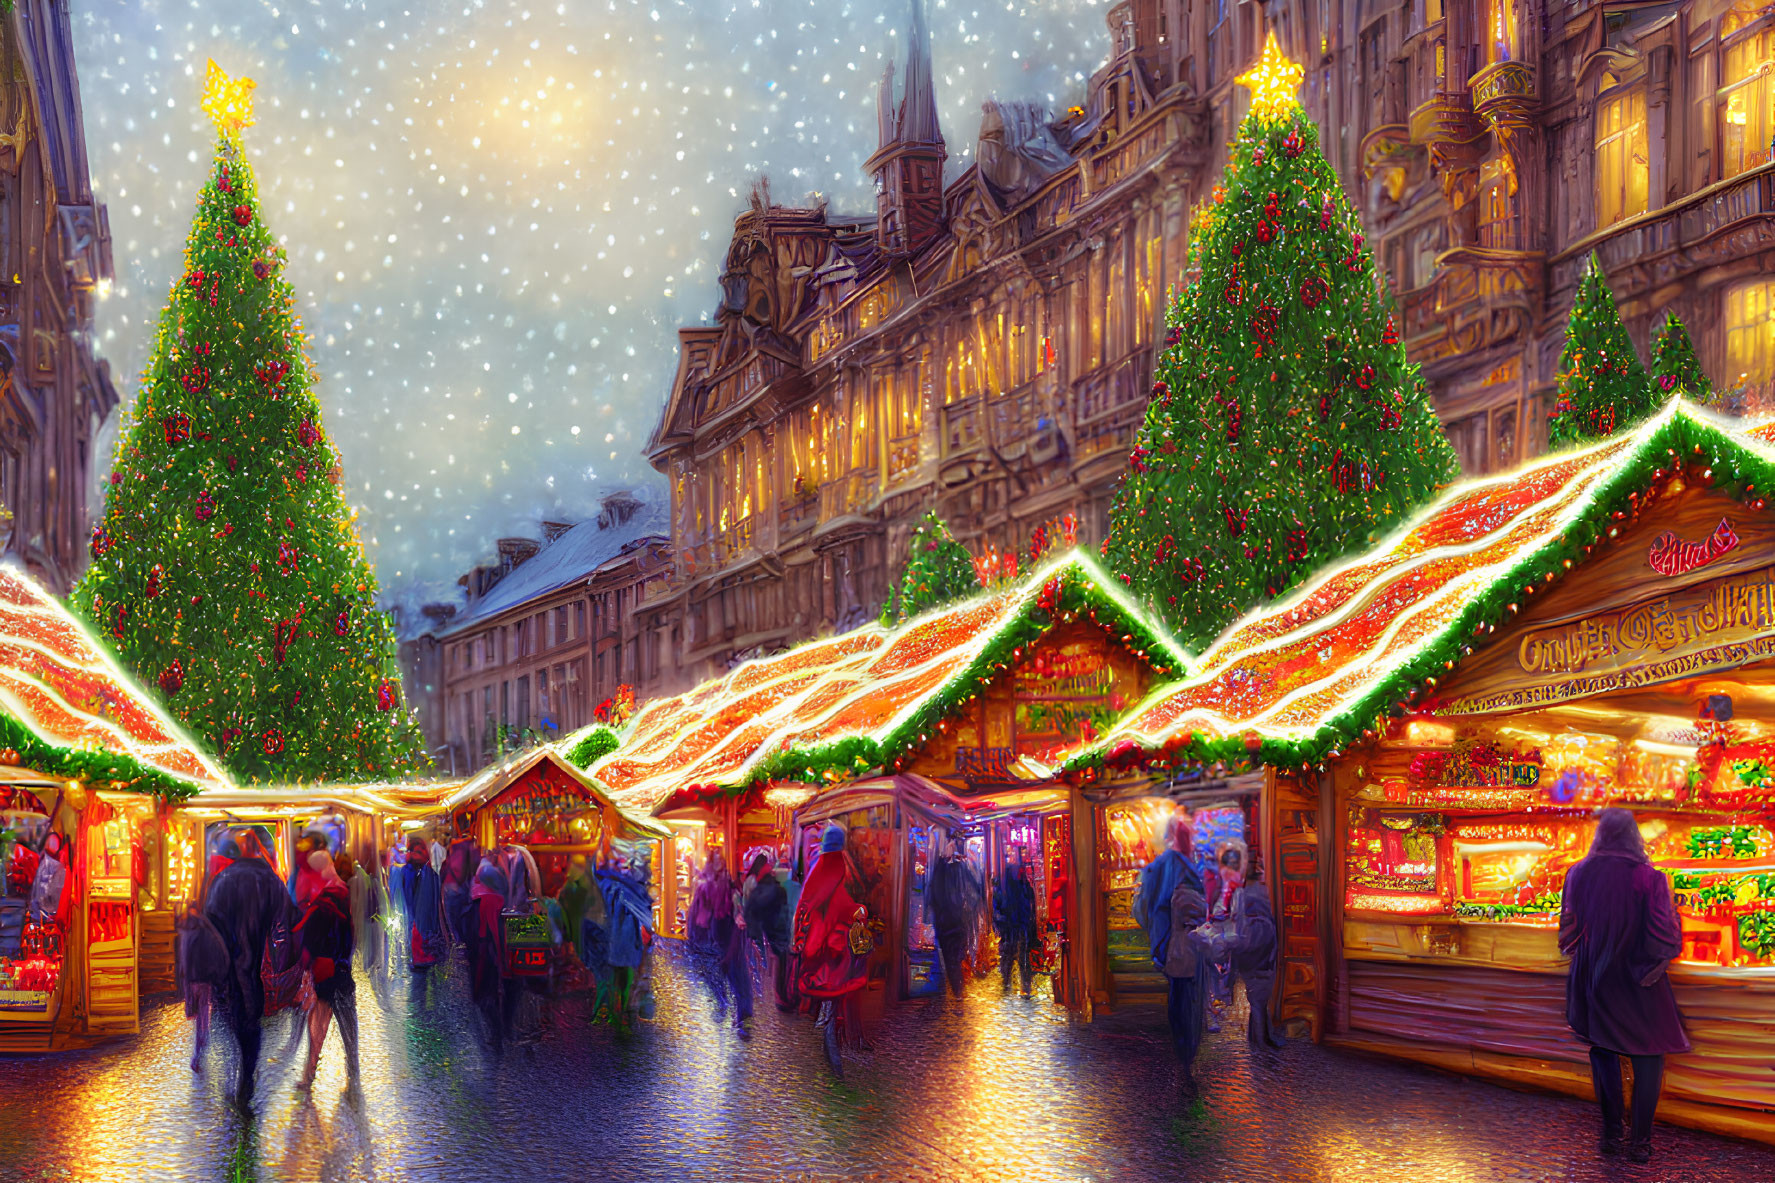 Festive market stalls with twinkling lights and Christmas trees on a bustling street at night.